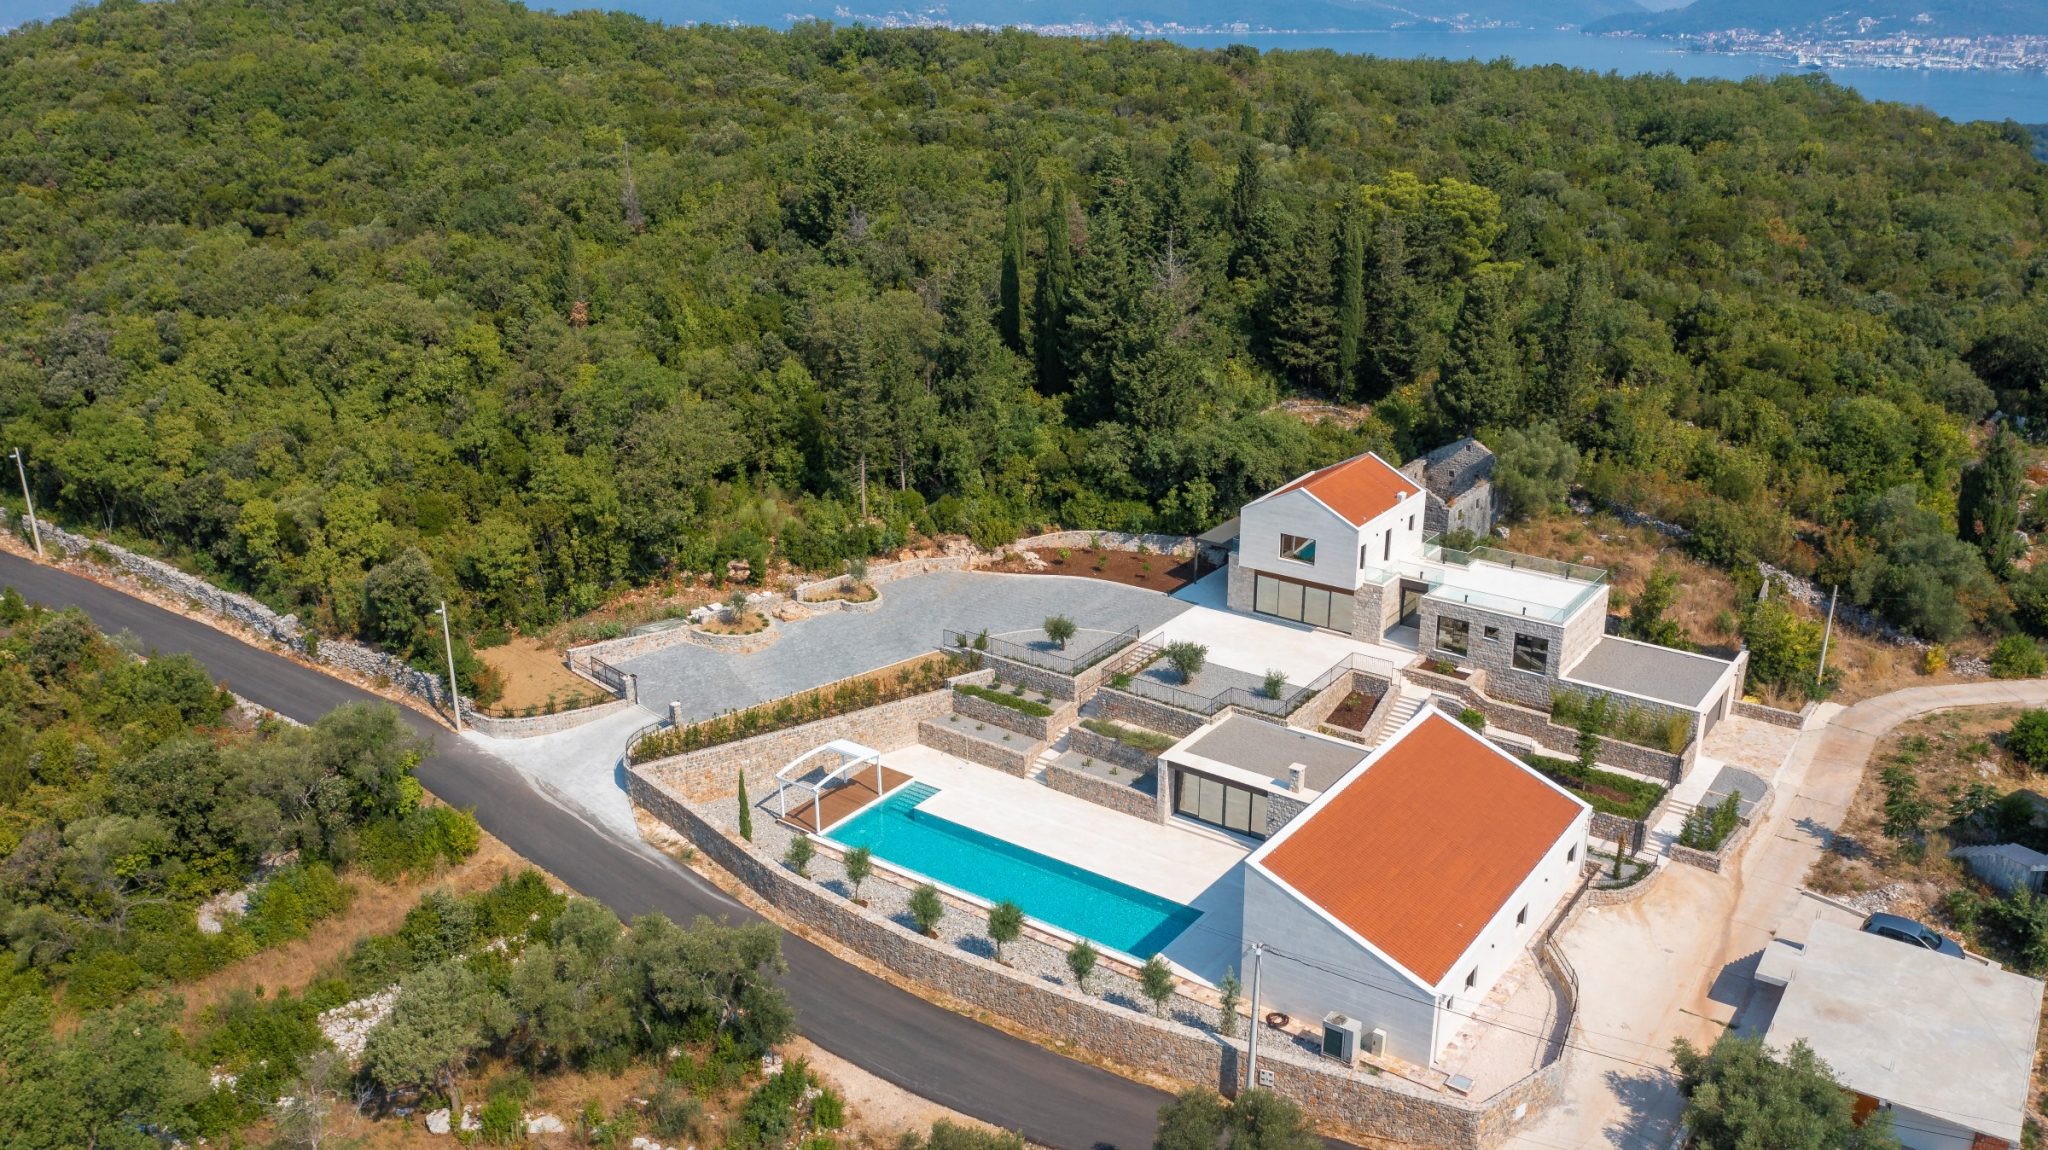 Tivat, Djurasevici – an exceptional villa estate with an outdoor swimming pool and large woodland area